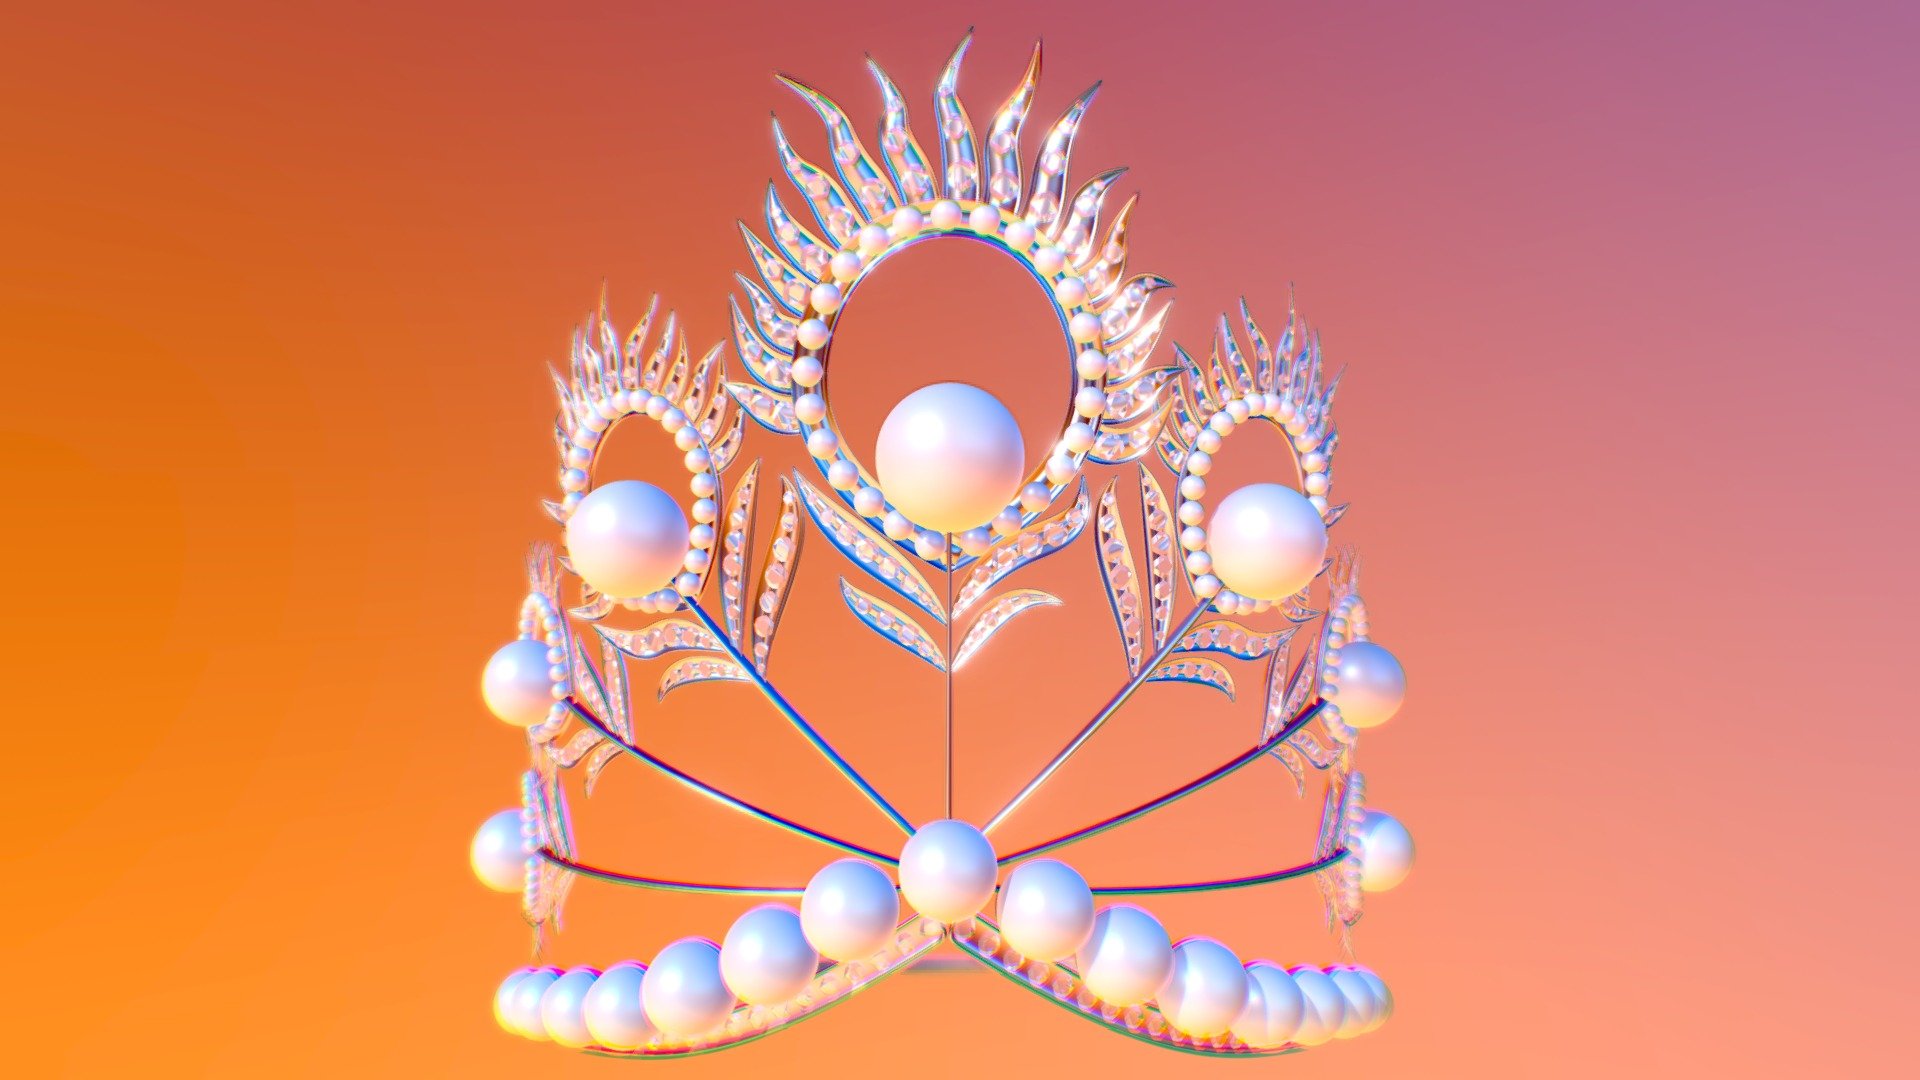 Tiara 3D object model in .obj format. Generic materials are included in .mtl file. For best results tweak your own render engine and materials. You also might be interested in other my tiara and crown models: https://sketchfab.com/sk-pro/collections/tiaras , https://sketchfab.com/sk-pro/collections/crowns . Best Regards 3d model